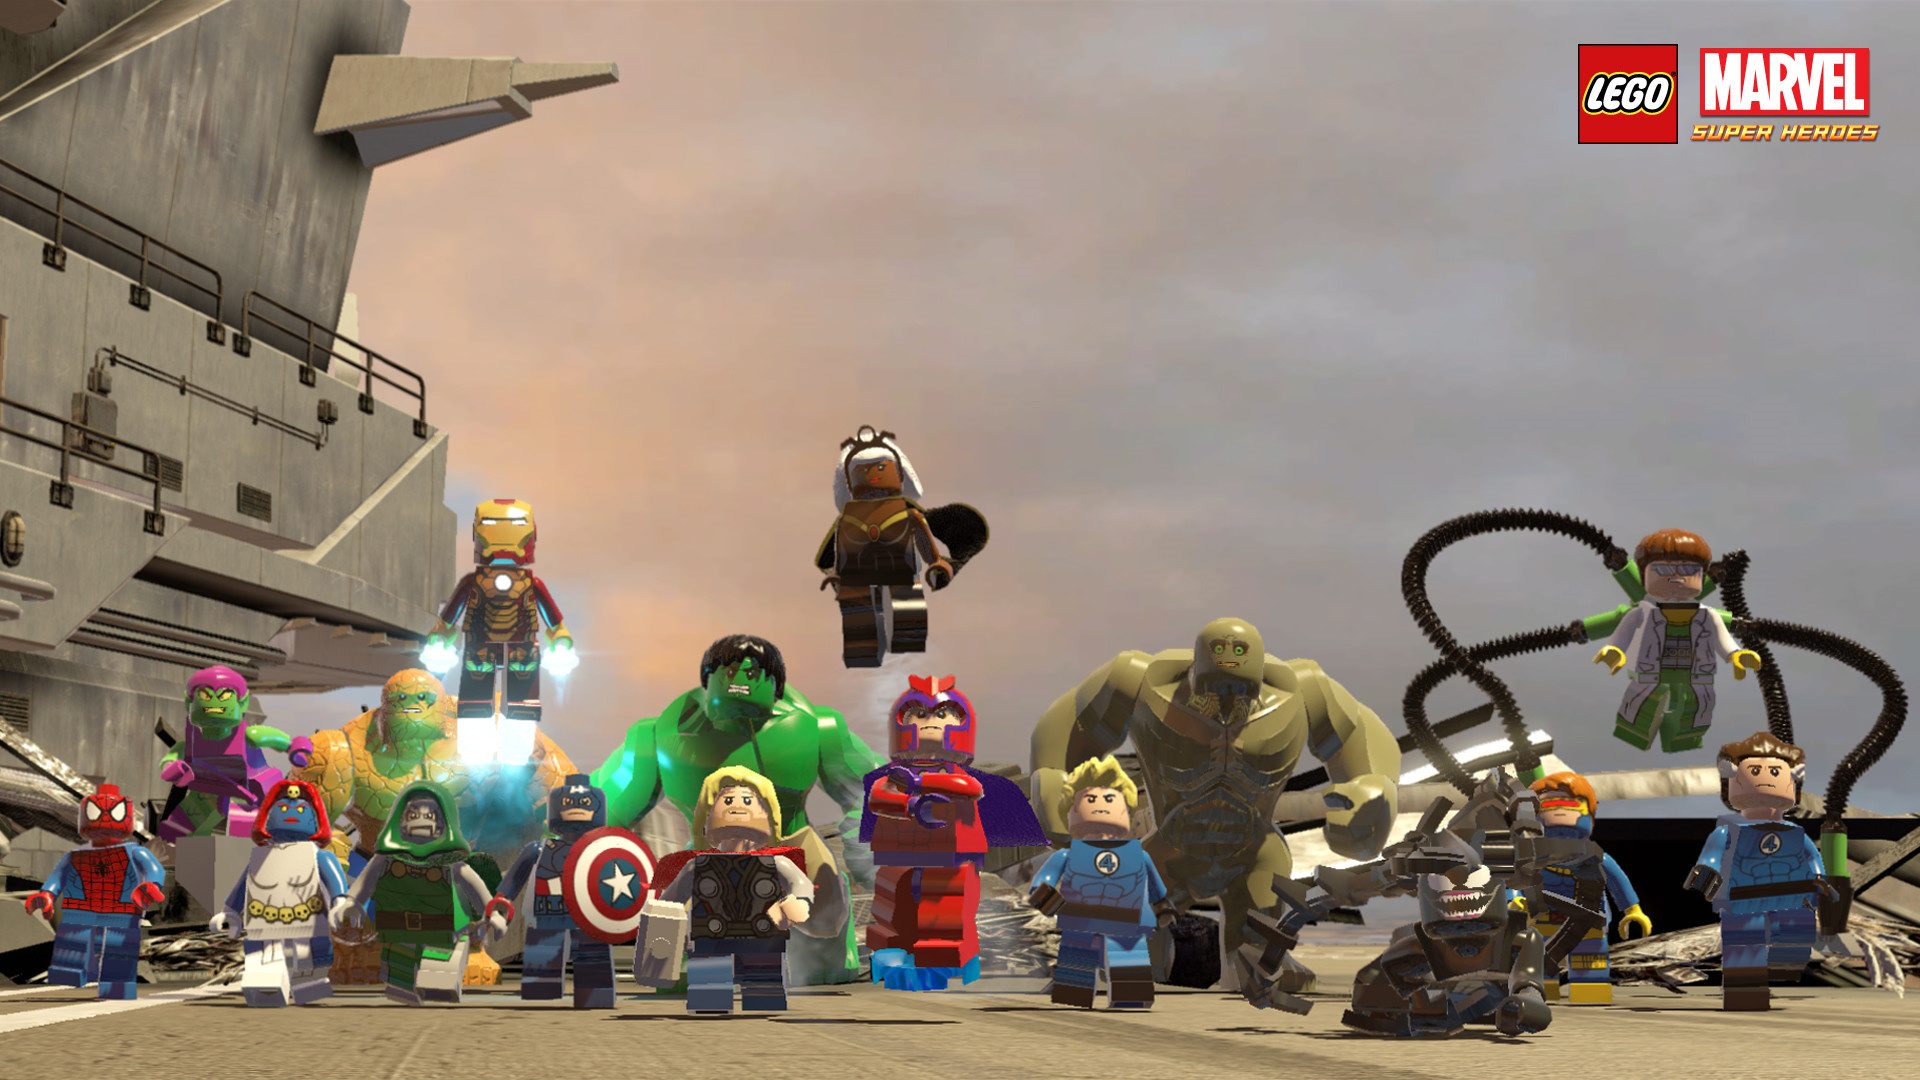 1920x1080 LEGO-Marvel-Super-Heroes-cast-wallpaper-by-TooMuchDew